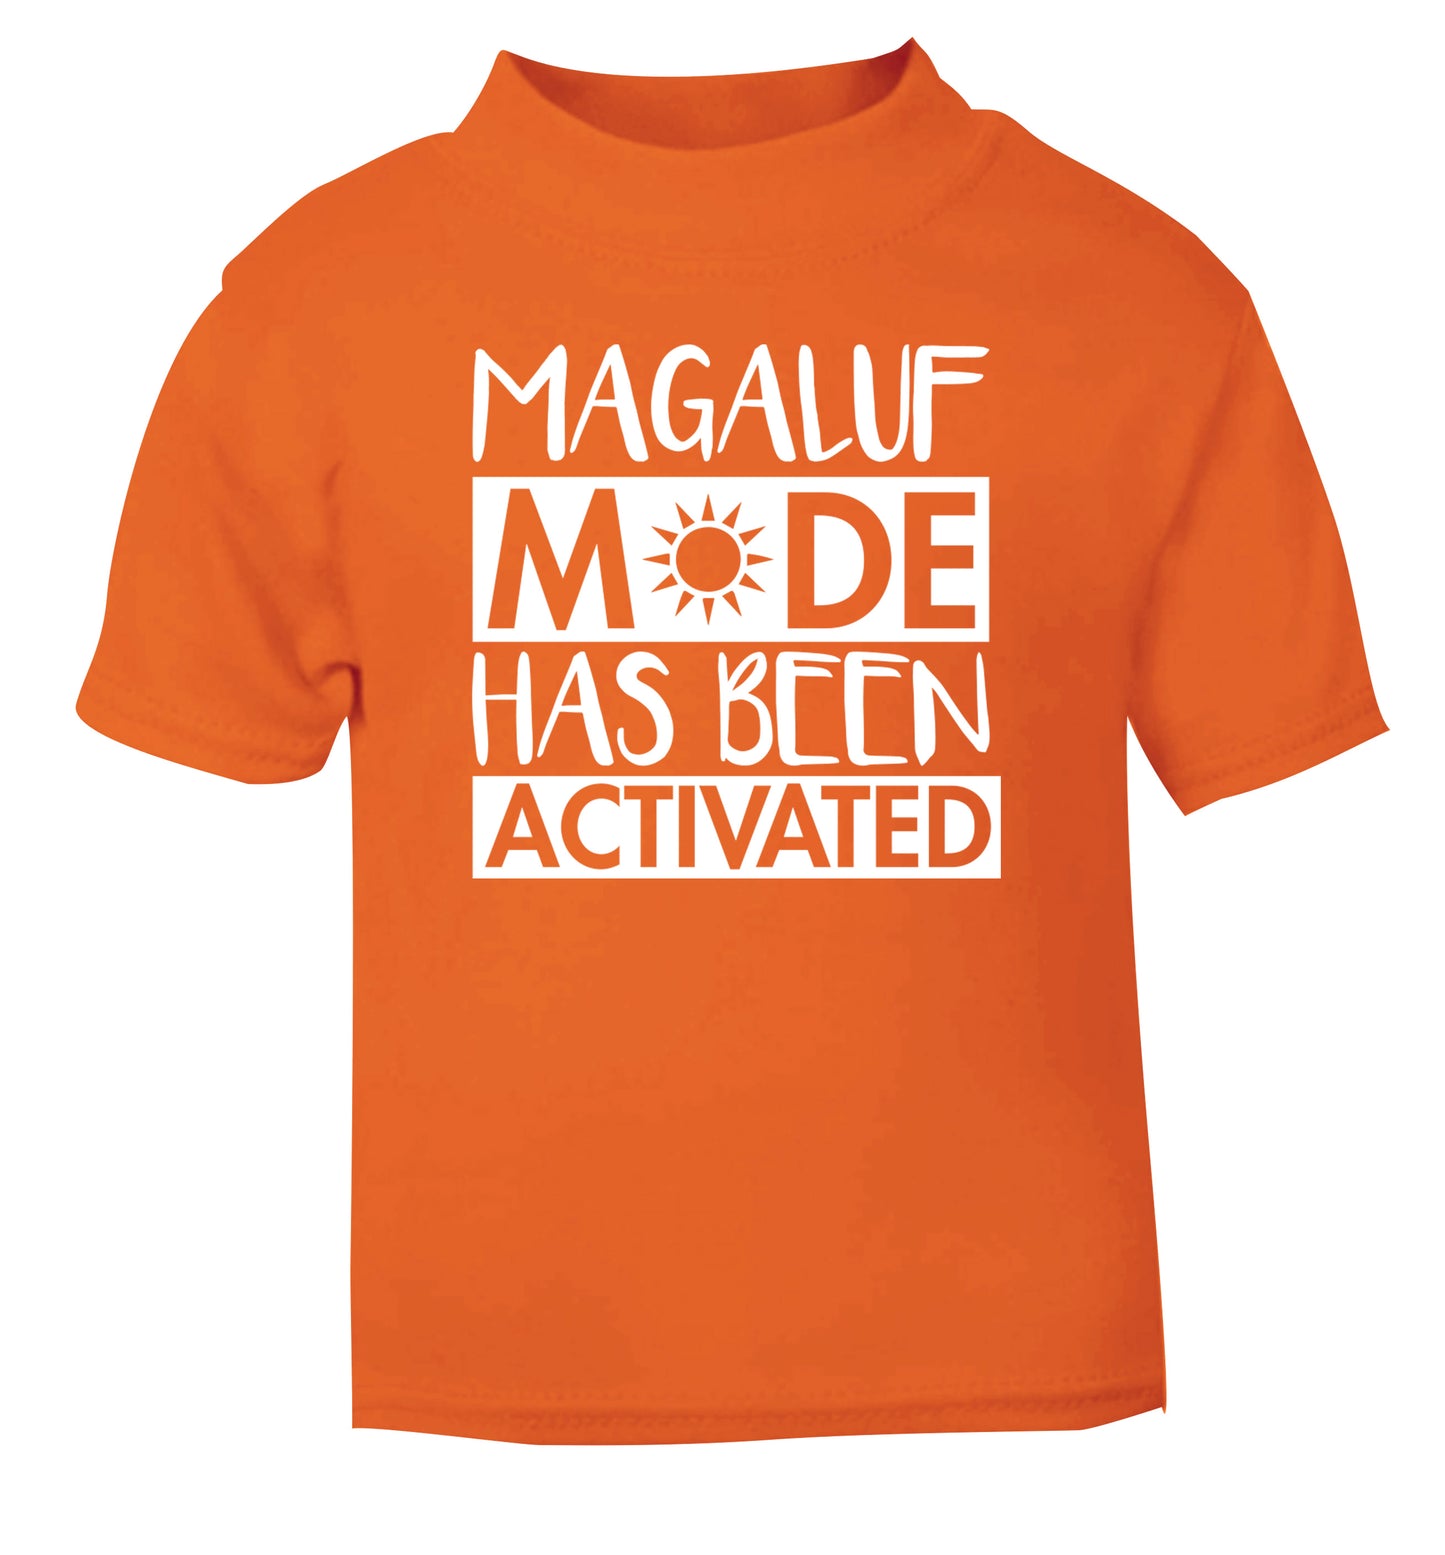 Magaluf mode has been activated orange Baby Toddler Tshirt 2 Years